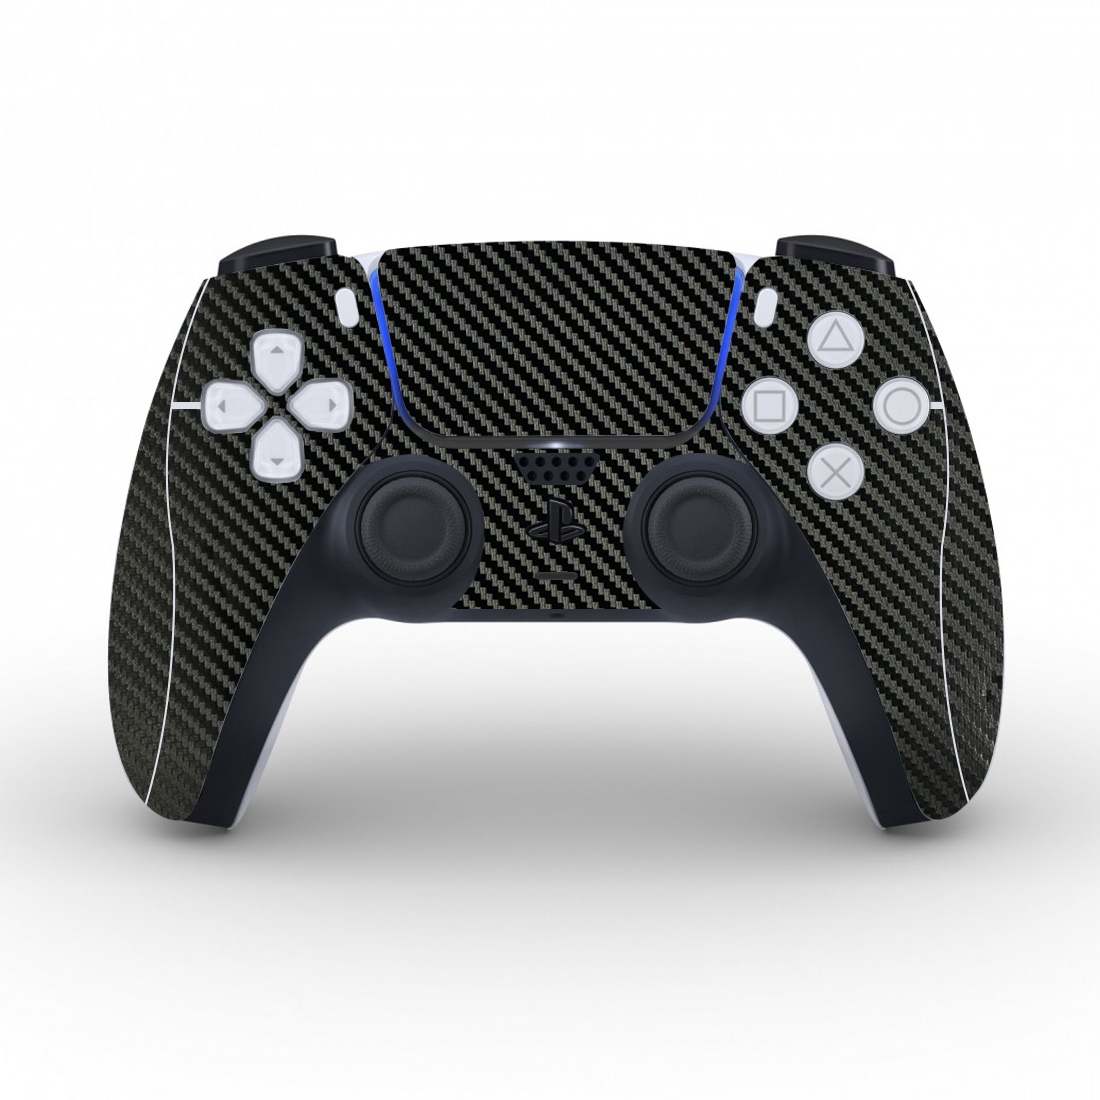 Carbon Fibre Protective Cover Sticker For PS5 Controller Skin For Playstation 5 Gamepad Decal PS5 Skin Sticker Vinyl